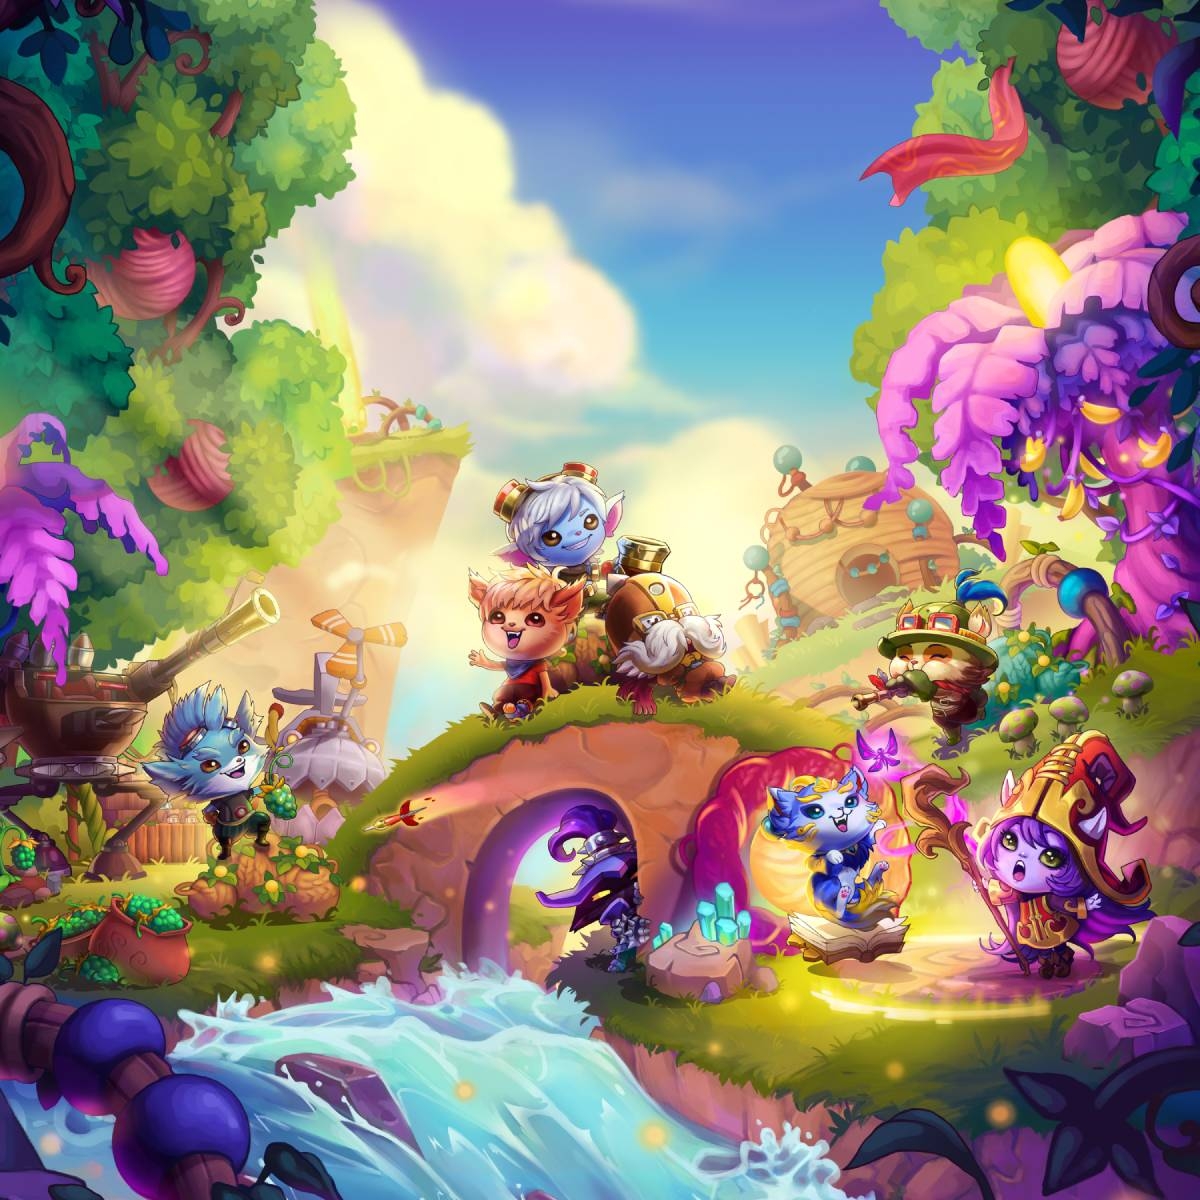 Bandle Tale: A League of Legends Story for Nintendo Switch - Nintendo  Official Site